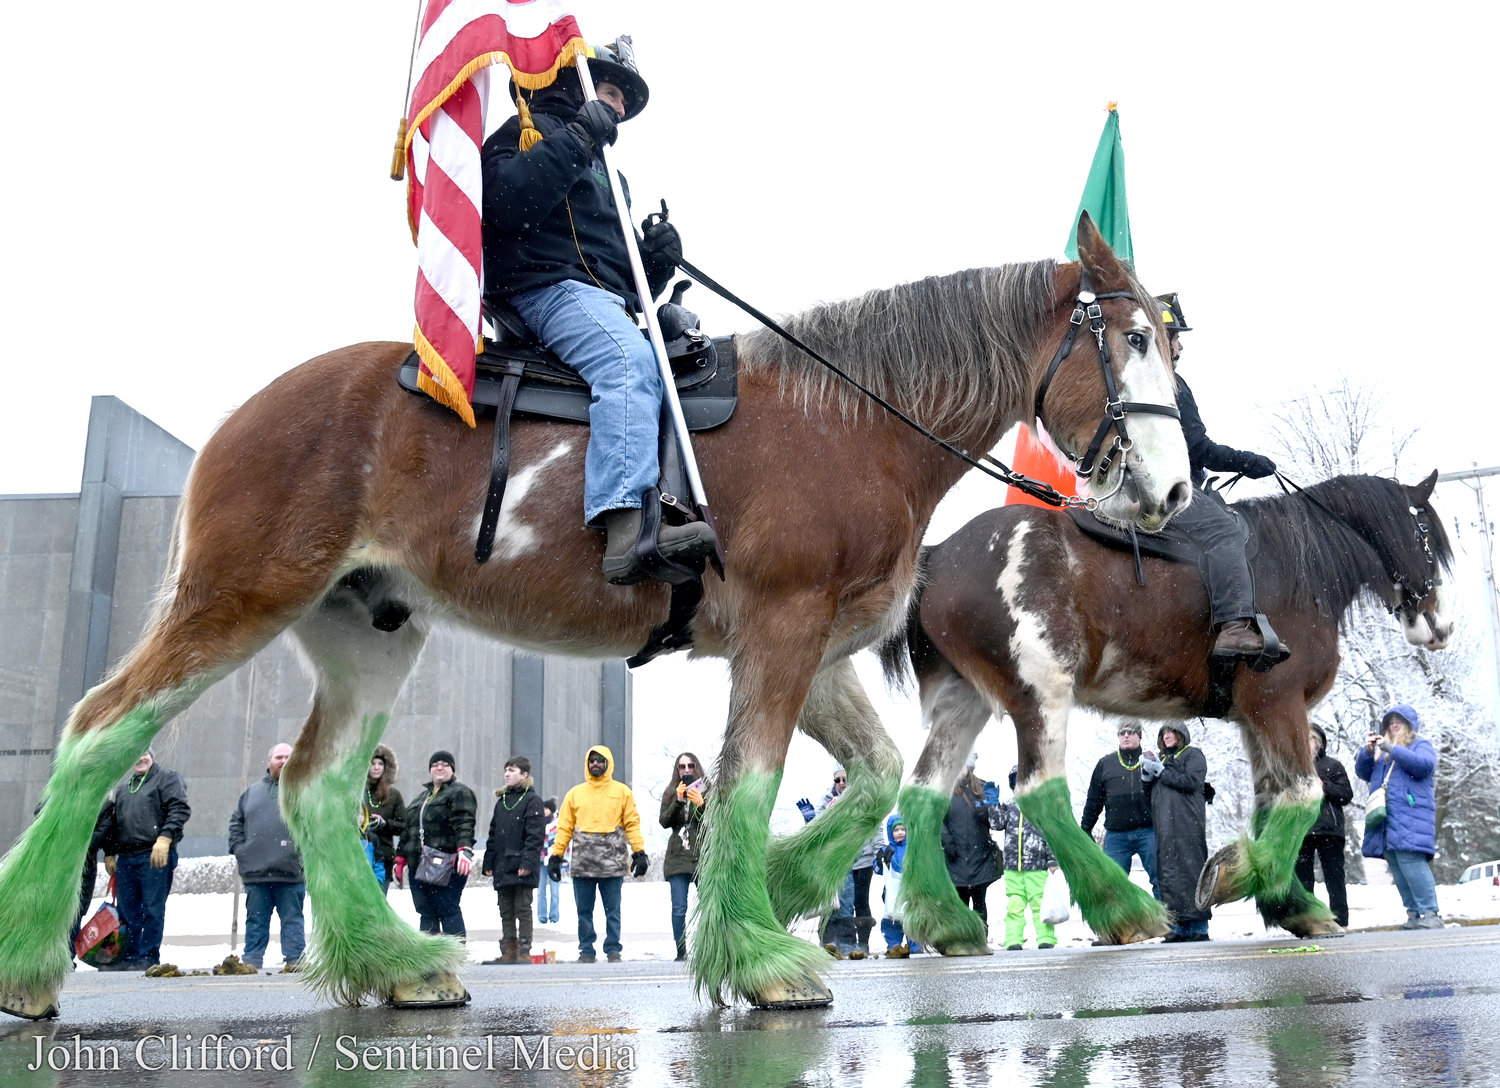 New York State's third largest St. Patrick's Day Parade stepped off promptly at 10 a.m. from Oneida Square in Utica on March 11, 2023.